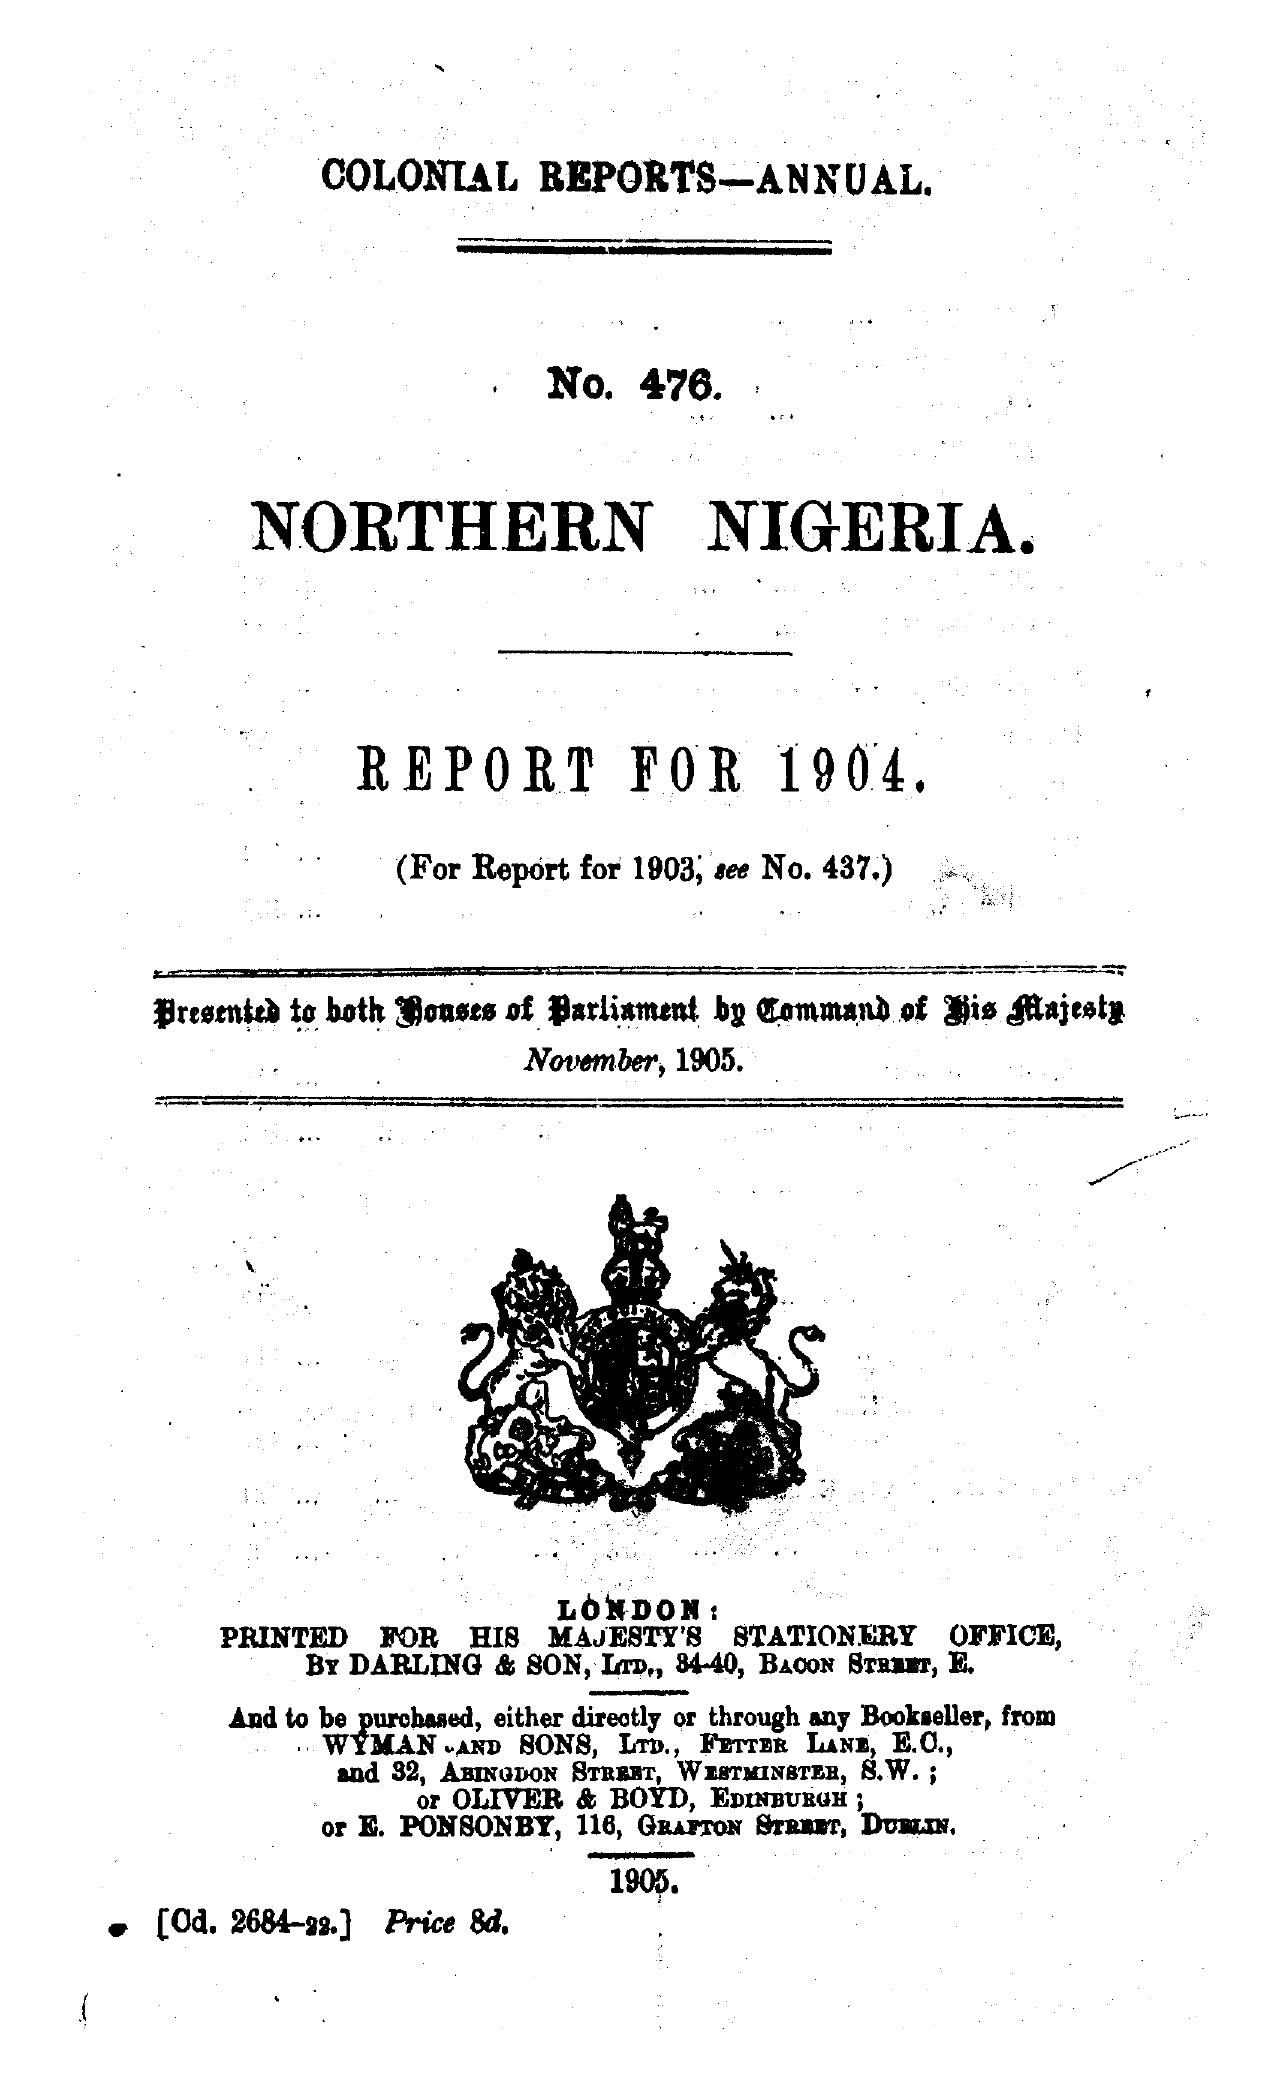 Annual Report of the Colonies, Northern Nigeria, 1904